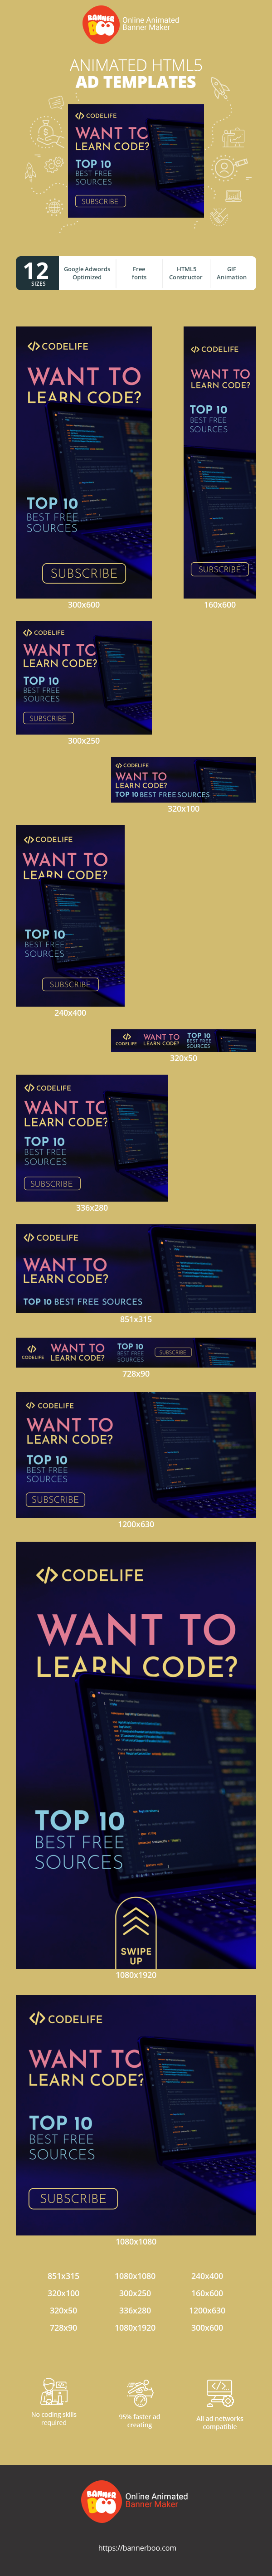 Banner ad template — Want To Learn Code? — Top 10 Best Free Sources